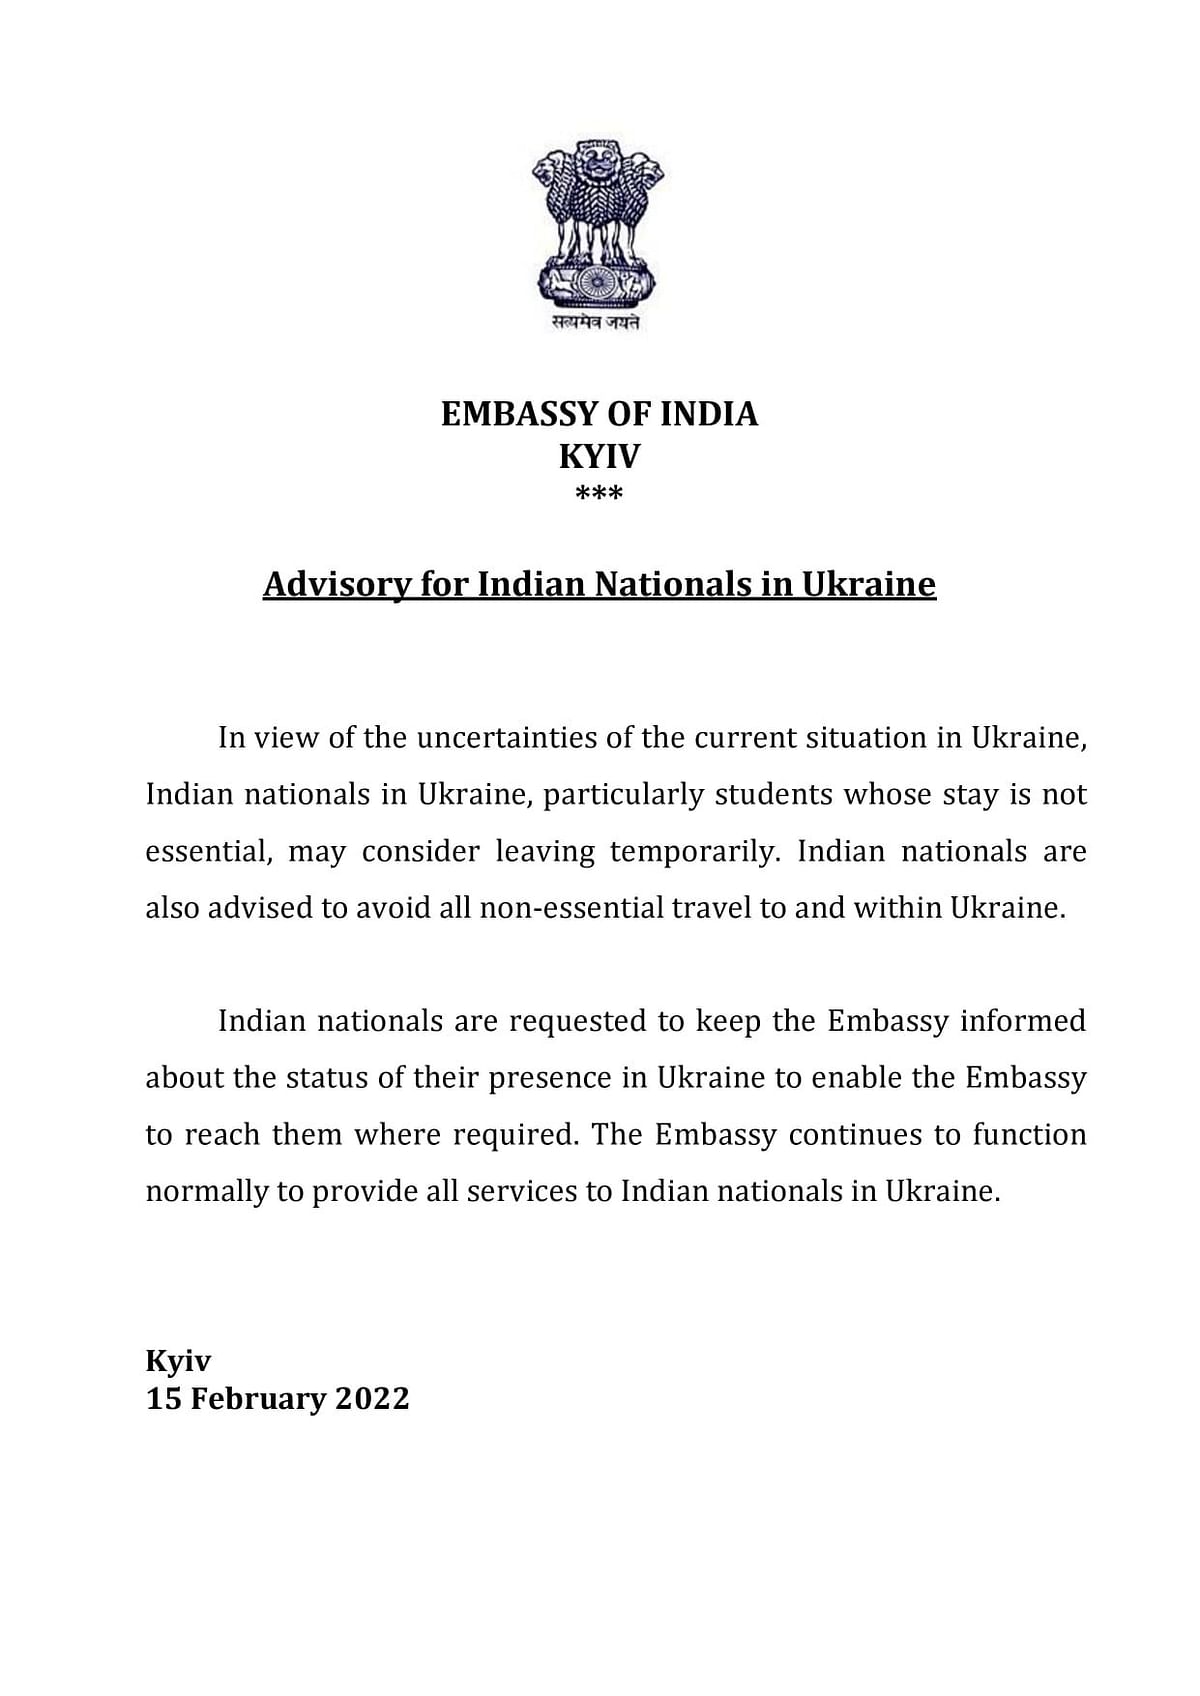 Indians, "particularly students whose stay is not essential," have been asked to leave Ukraine due to the crisis.